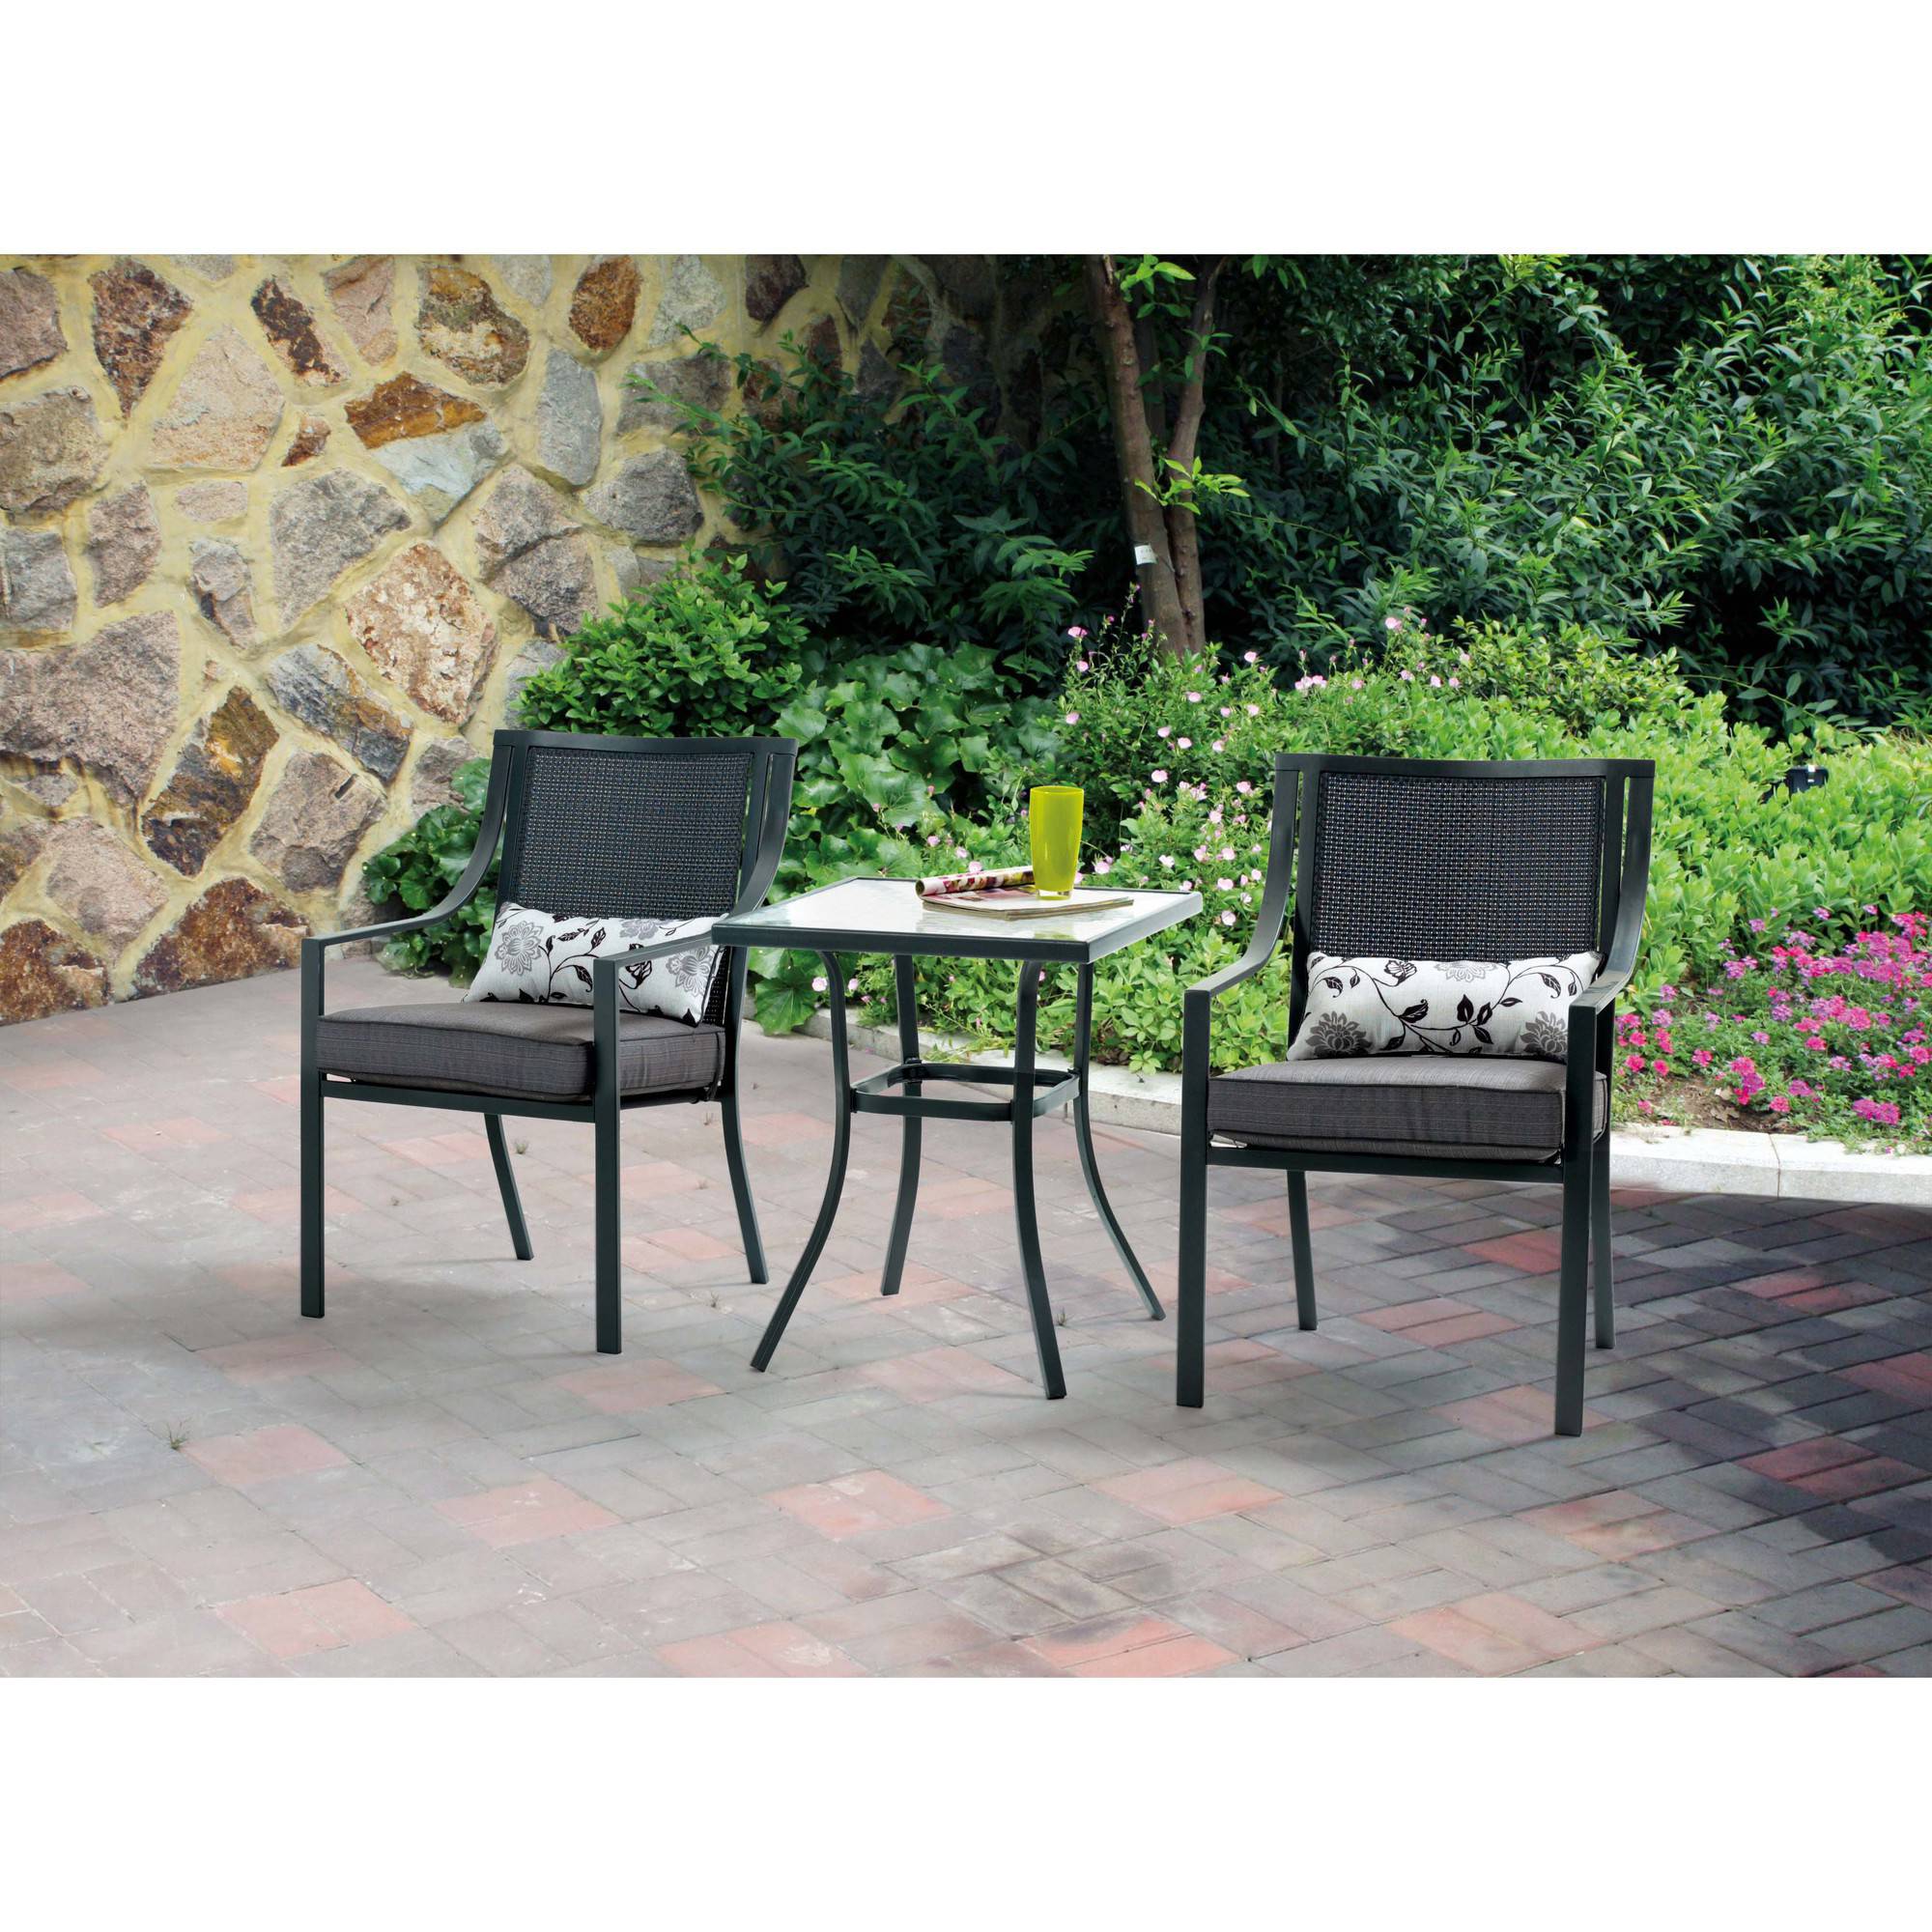 Mainstays Alexandra Square 3-Piece Outdoor Bistro Set, Red Stripe with Butterflies, Seats 2